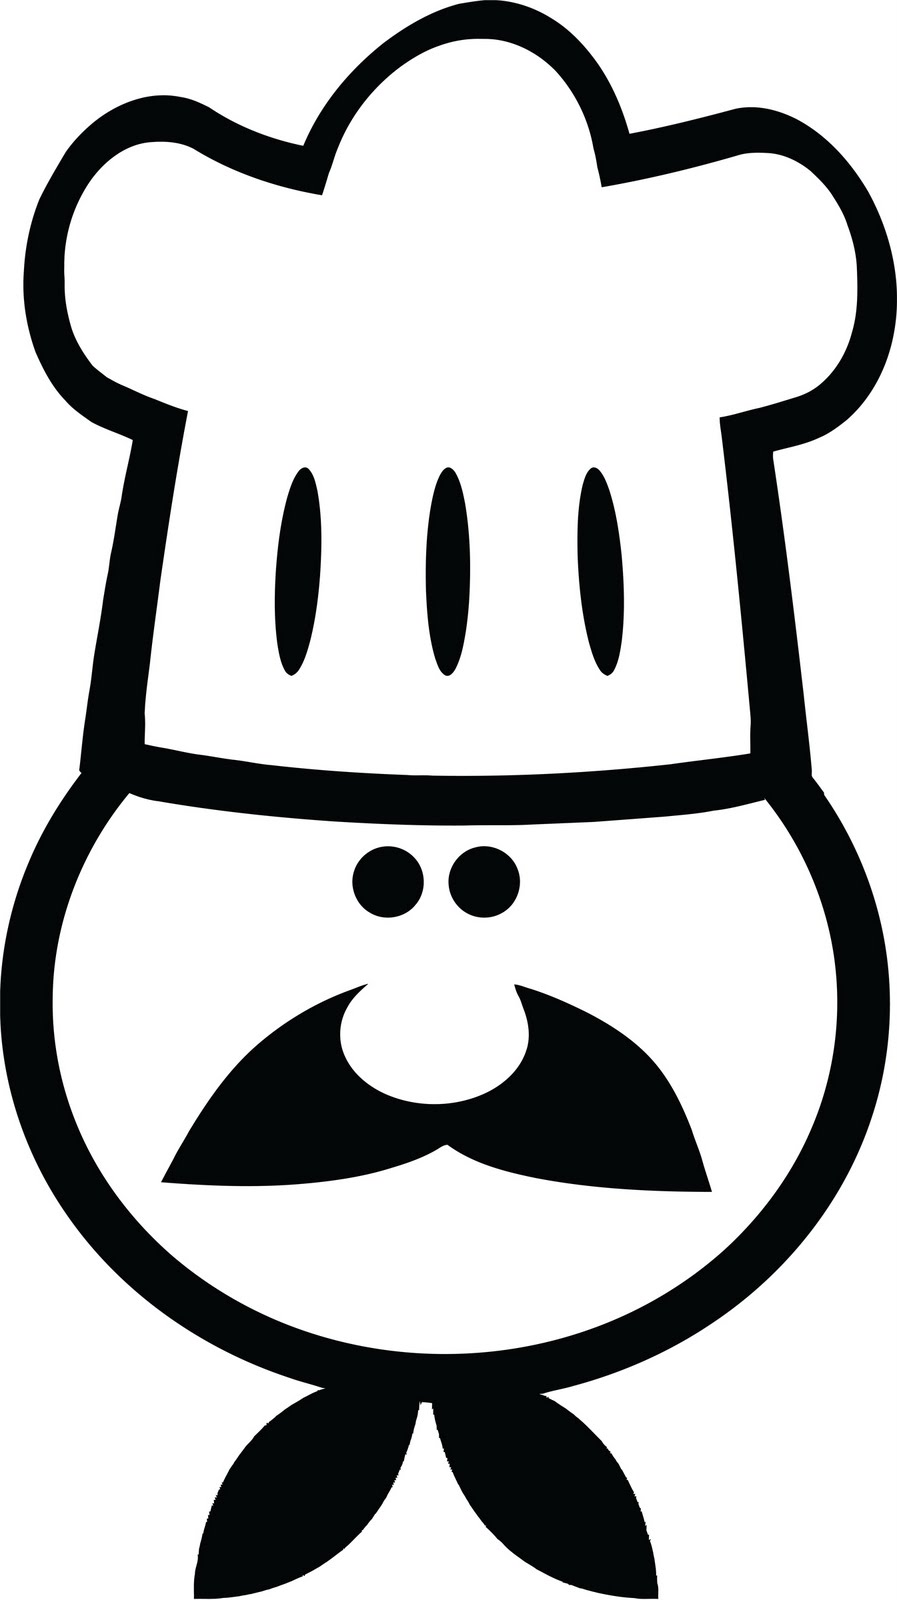 A chef hat clipart